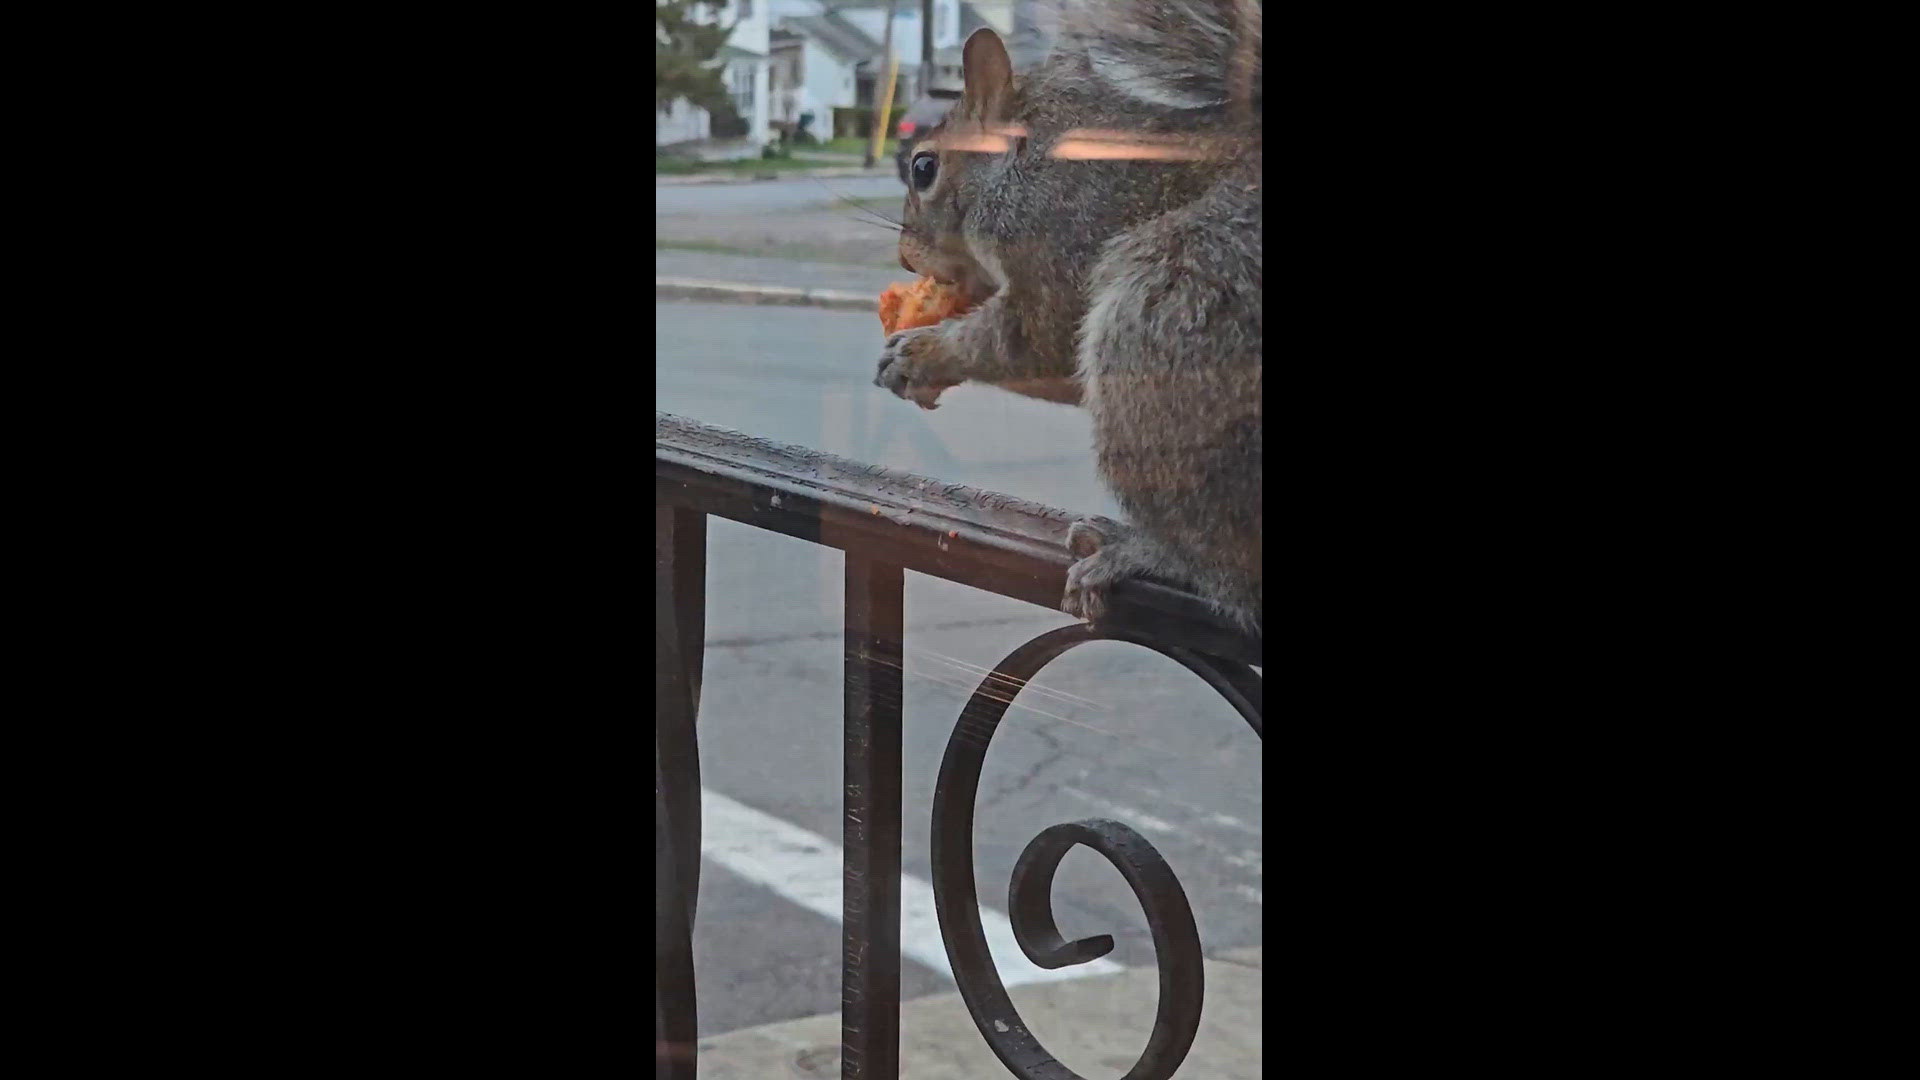 Saw this squirrel eating a buffalo chicken wing in Dunmore.
Credit: Mel Hughes